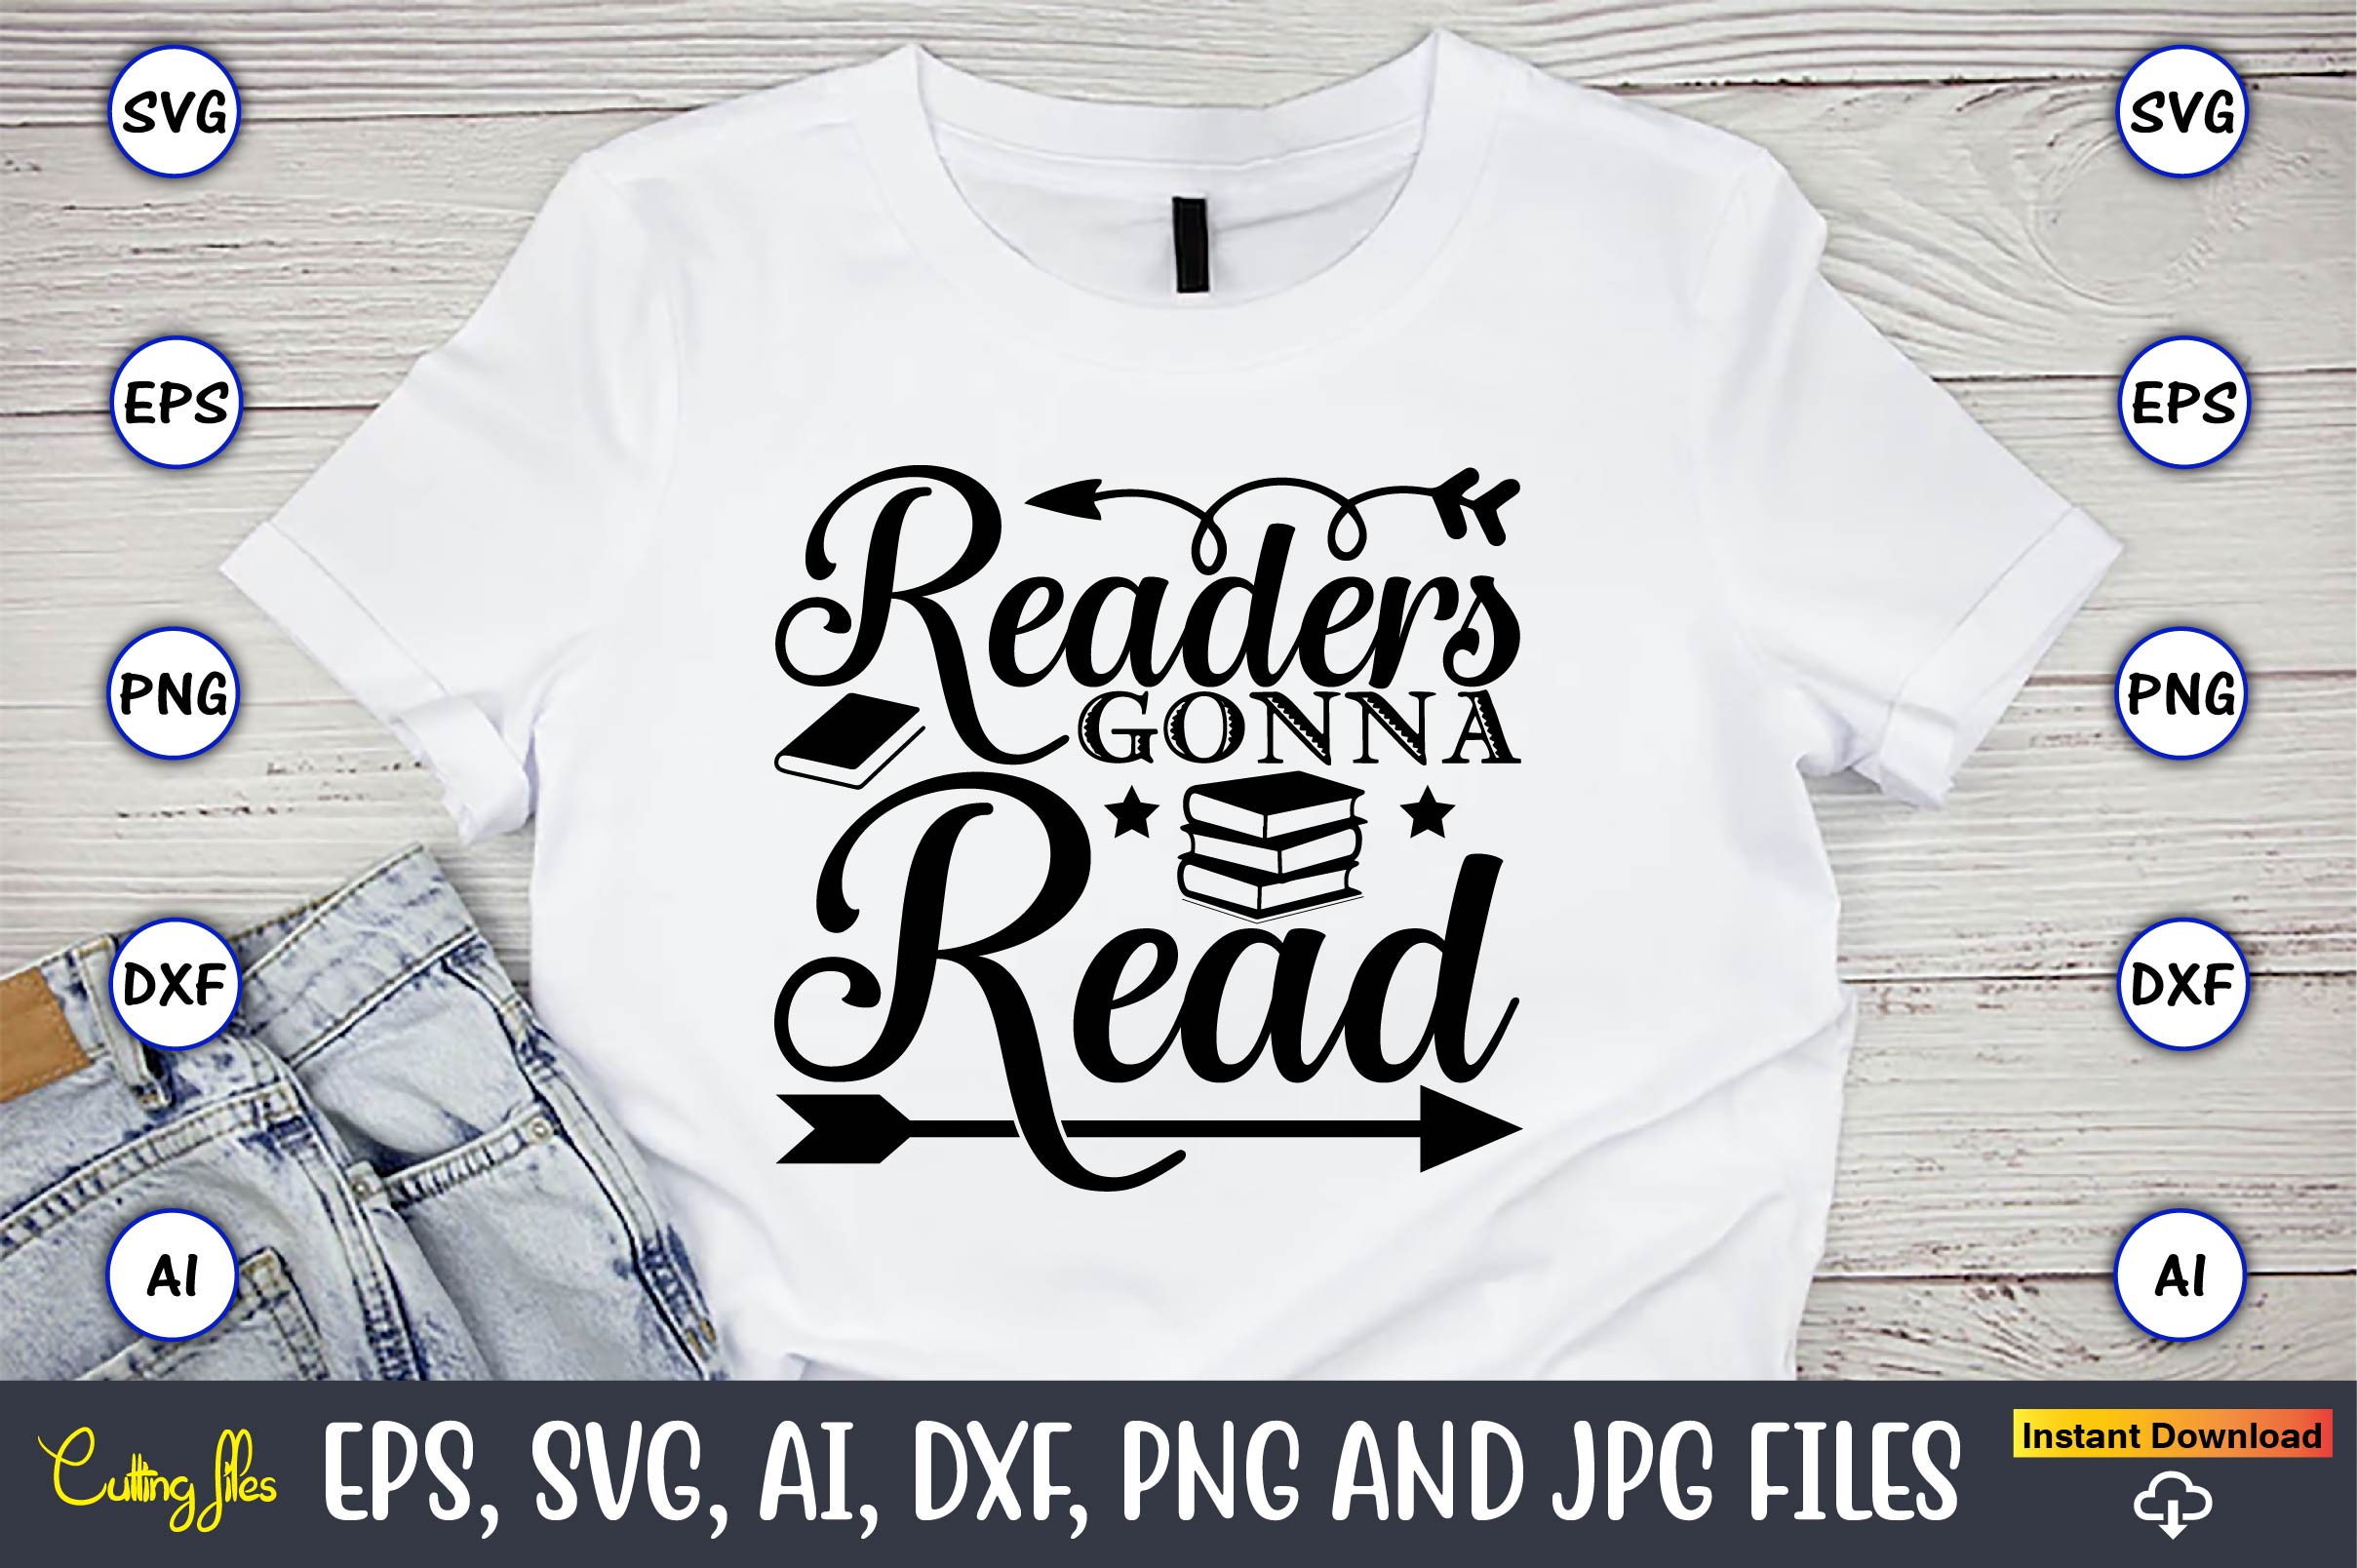 Image of a white t-shirt with a charming inscription Readers gonna read.